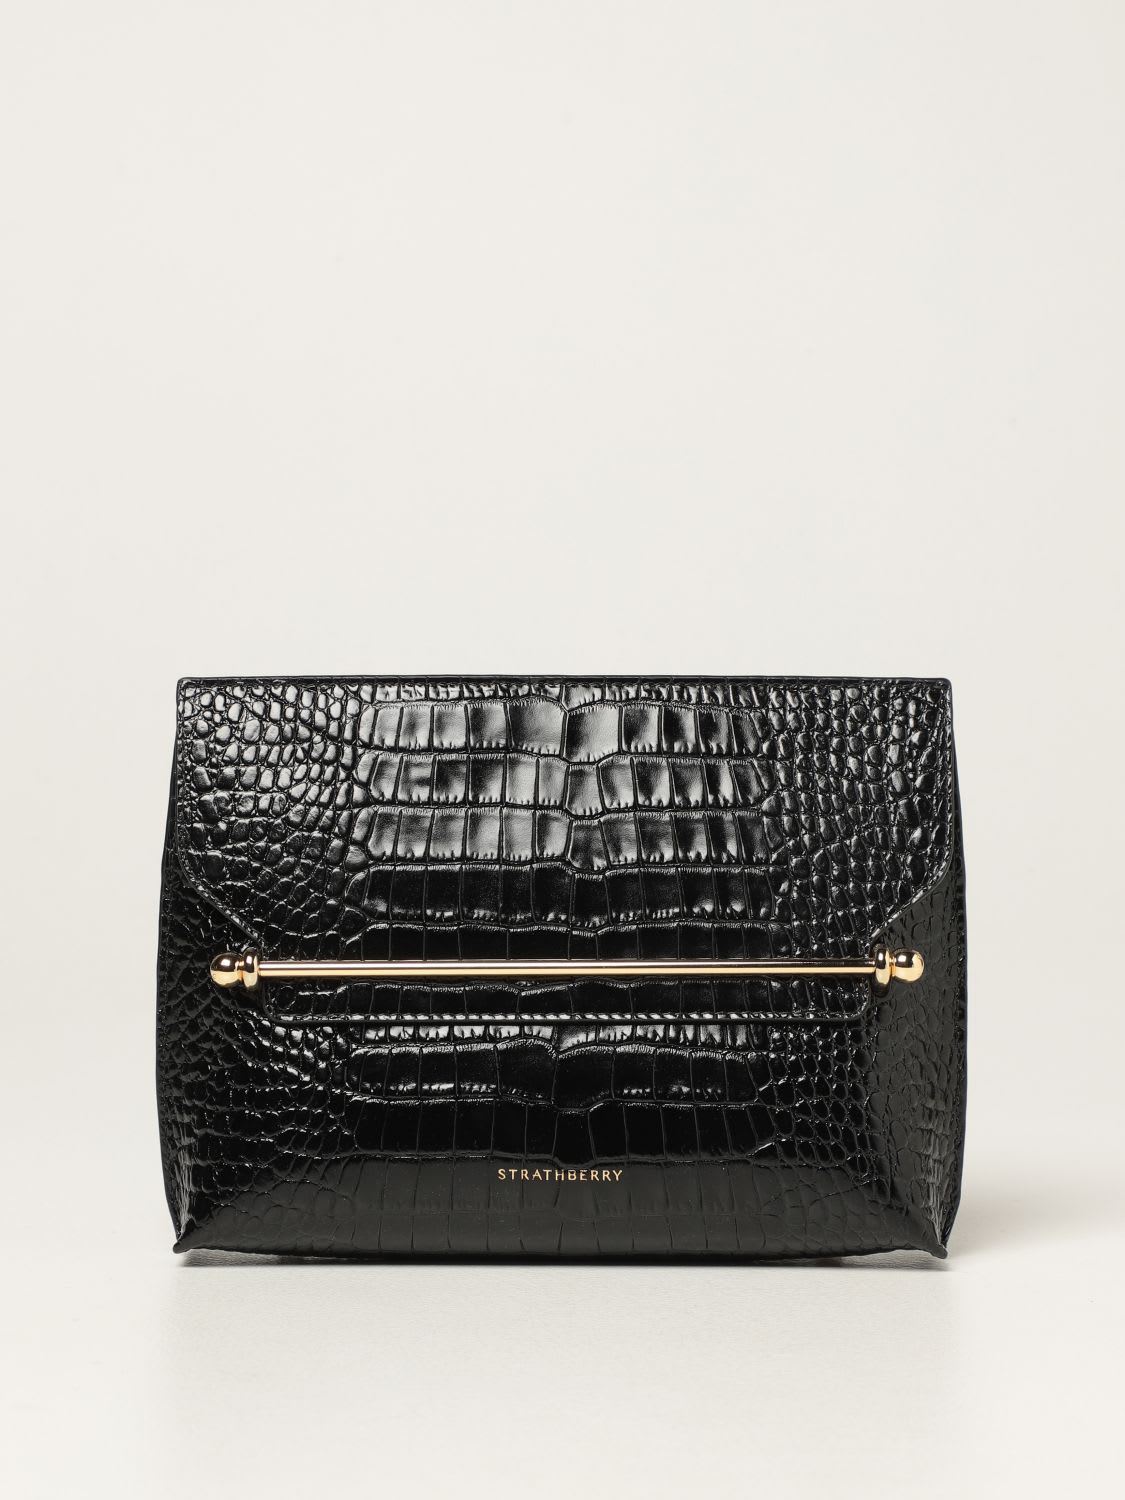 Strathberry Crossbody Bags Stylist Strathberry Bag In Crocodile Print Leather